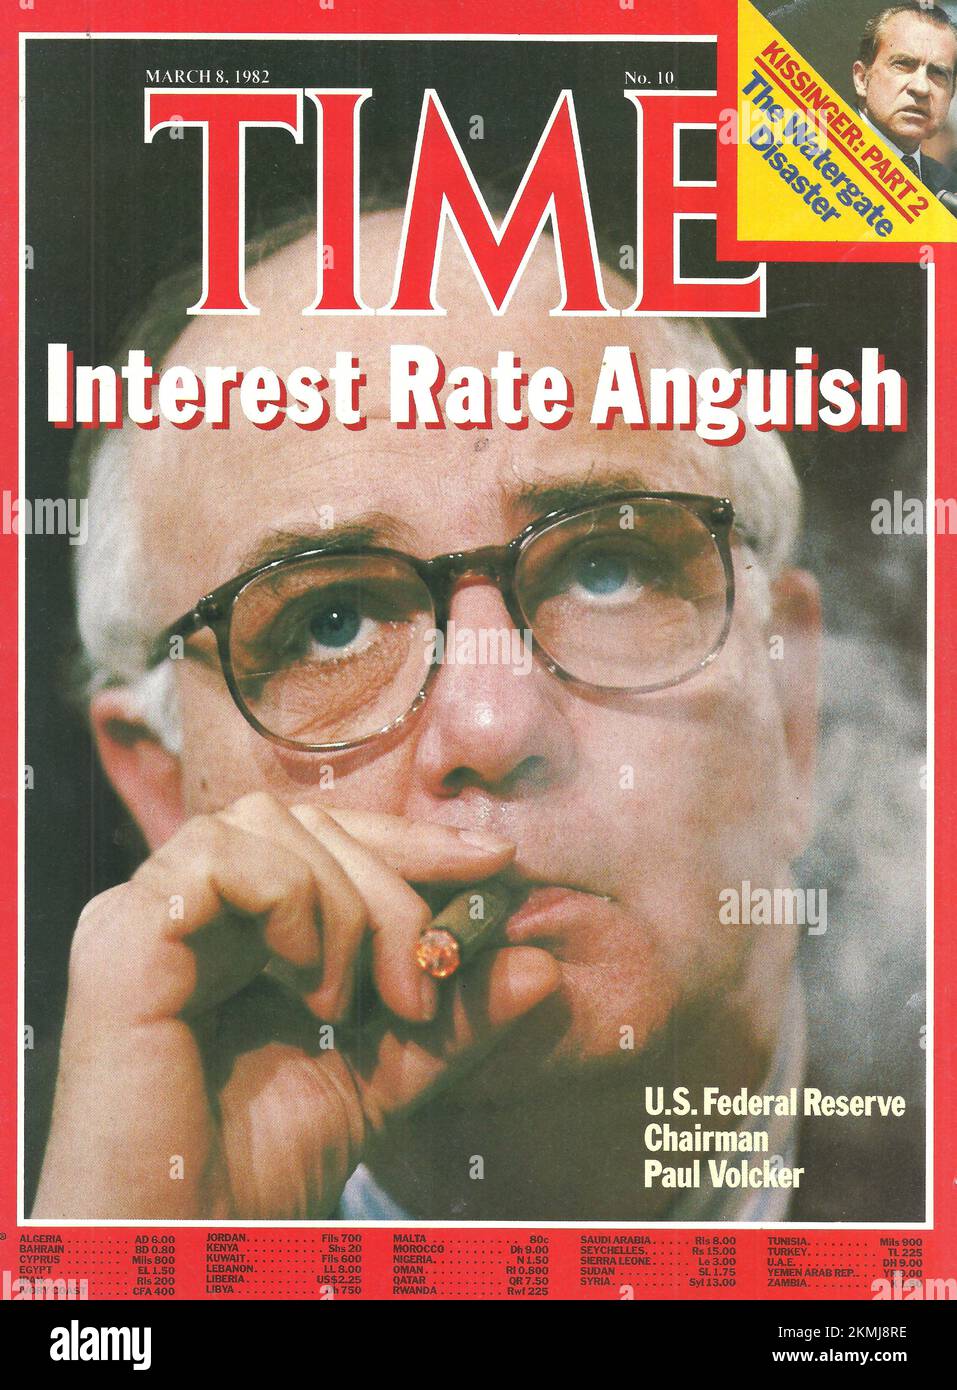 Front page of Time magazine March 8, 1982 Interest rate Anguish Stock Photo